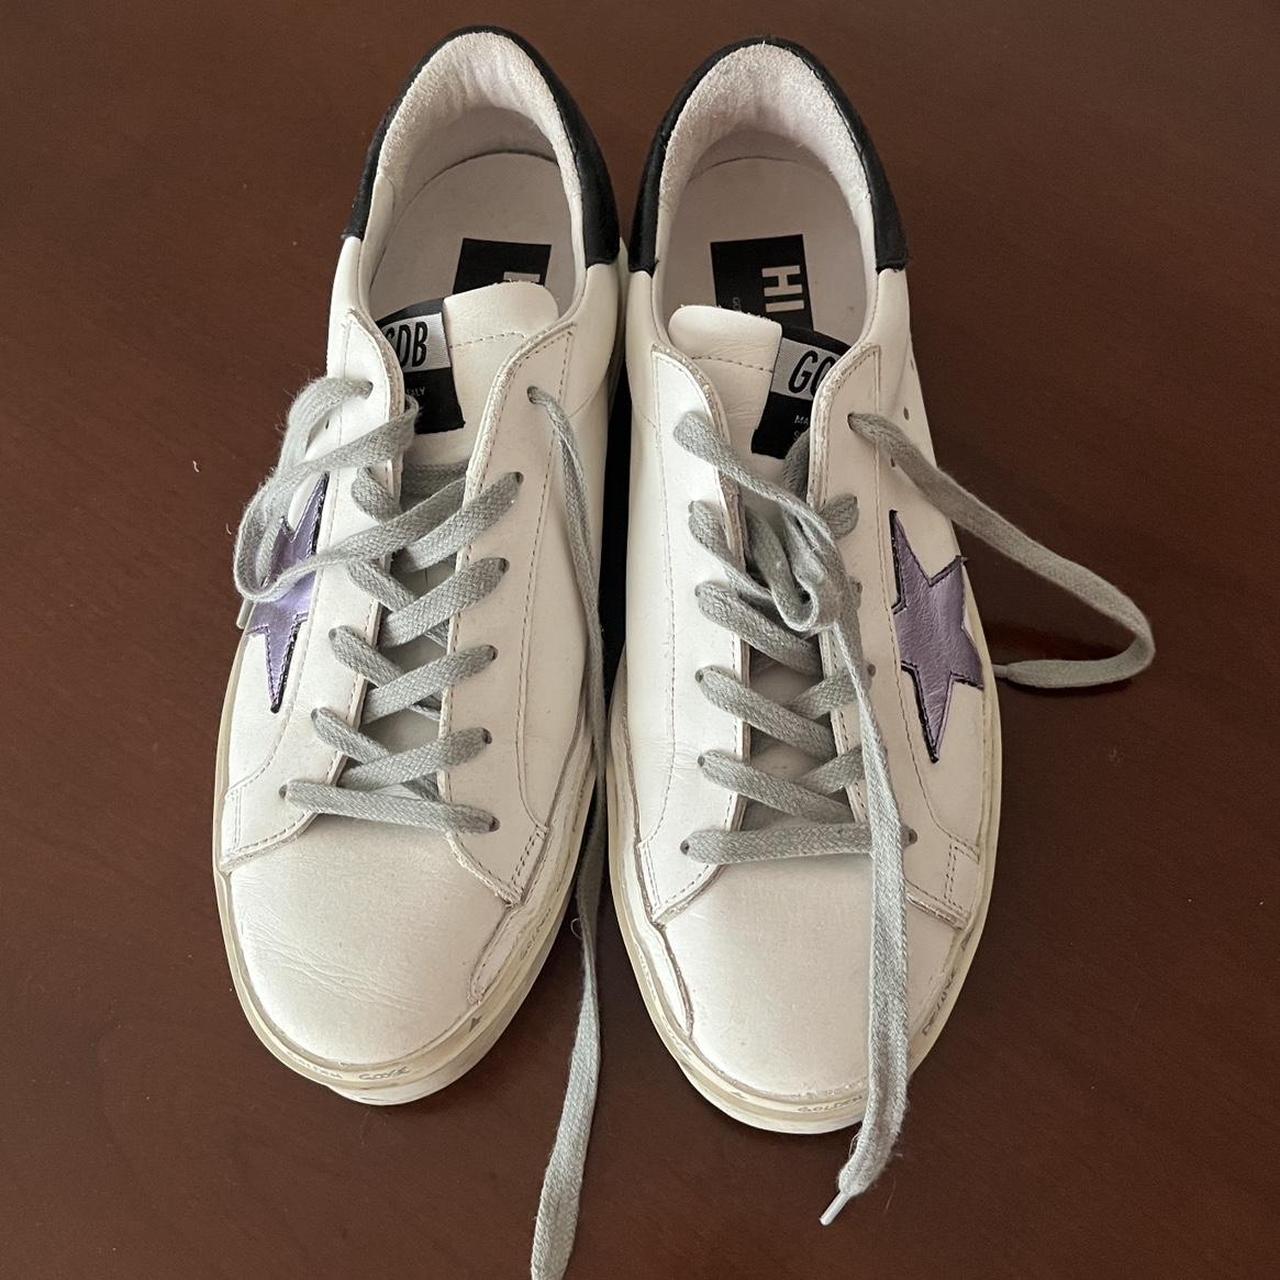 Golden Goose Women's White and Purple Trainers (2)